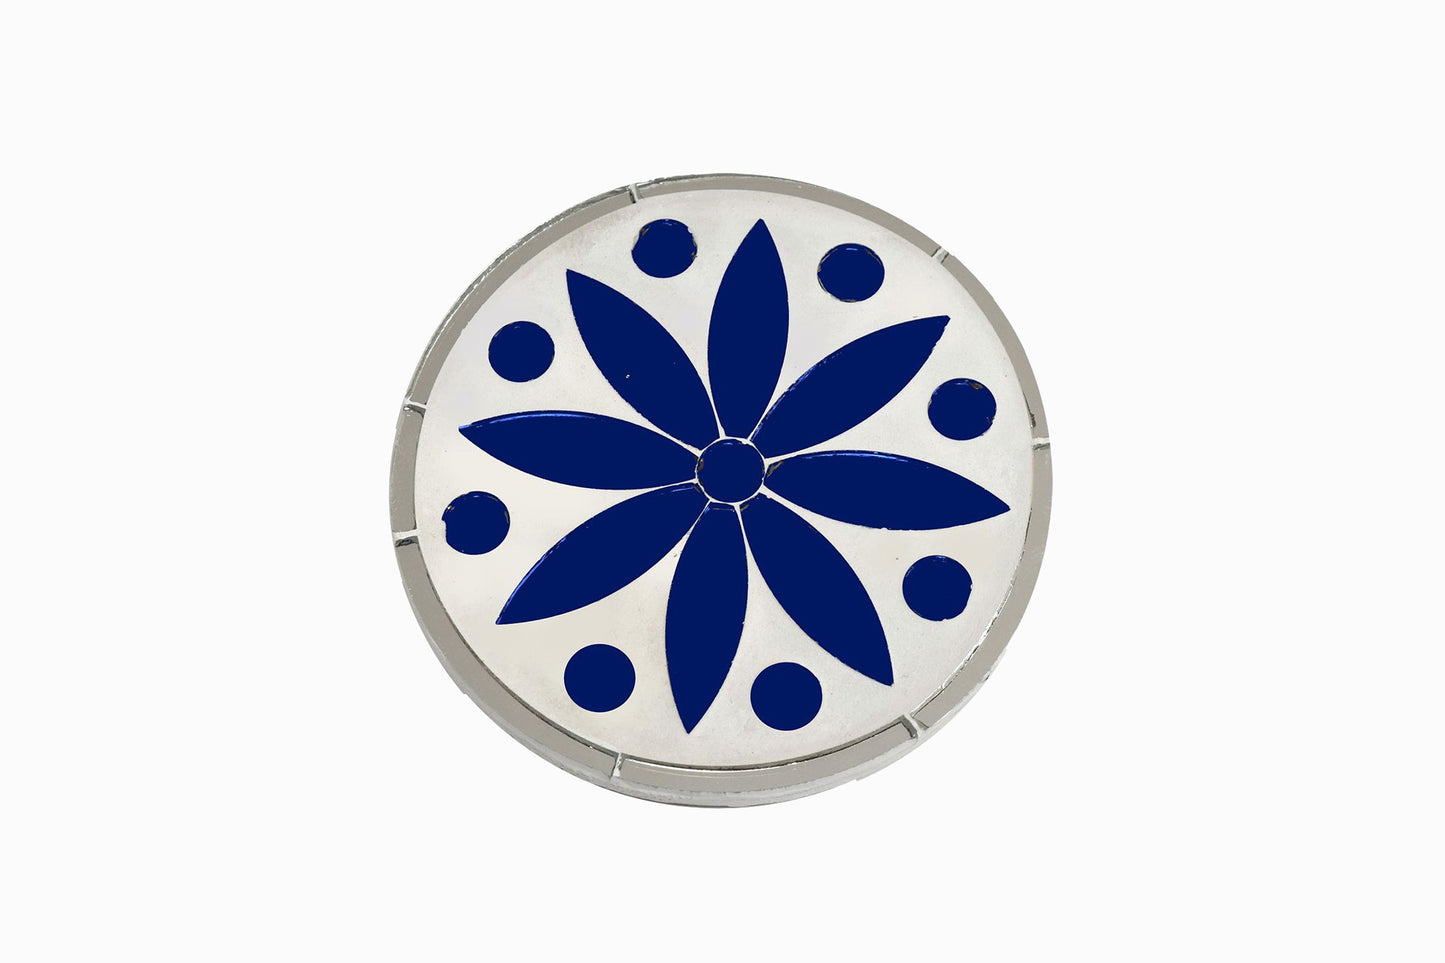 TWO SIDED INLAID MIRROR COASTER BLUE SILVER